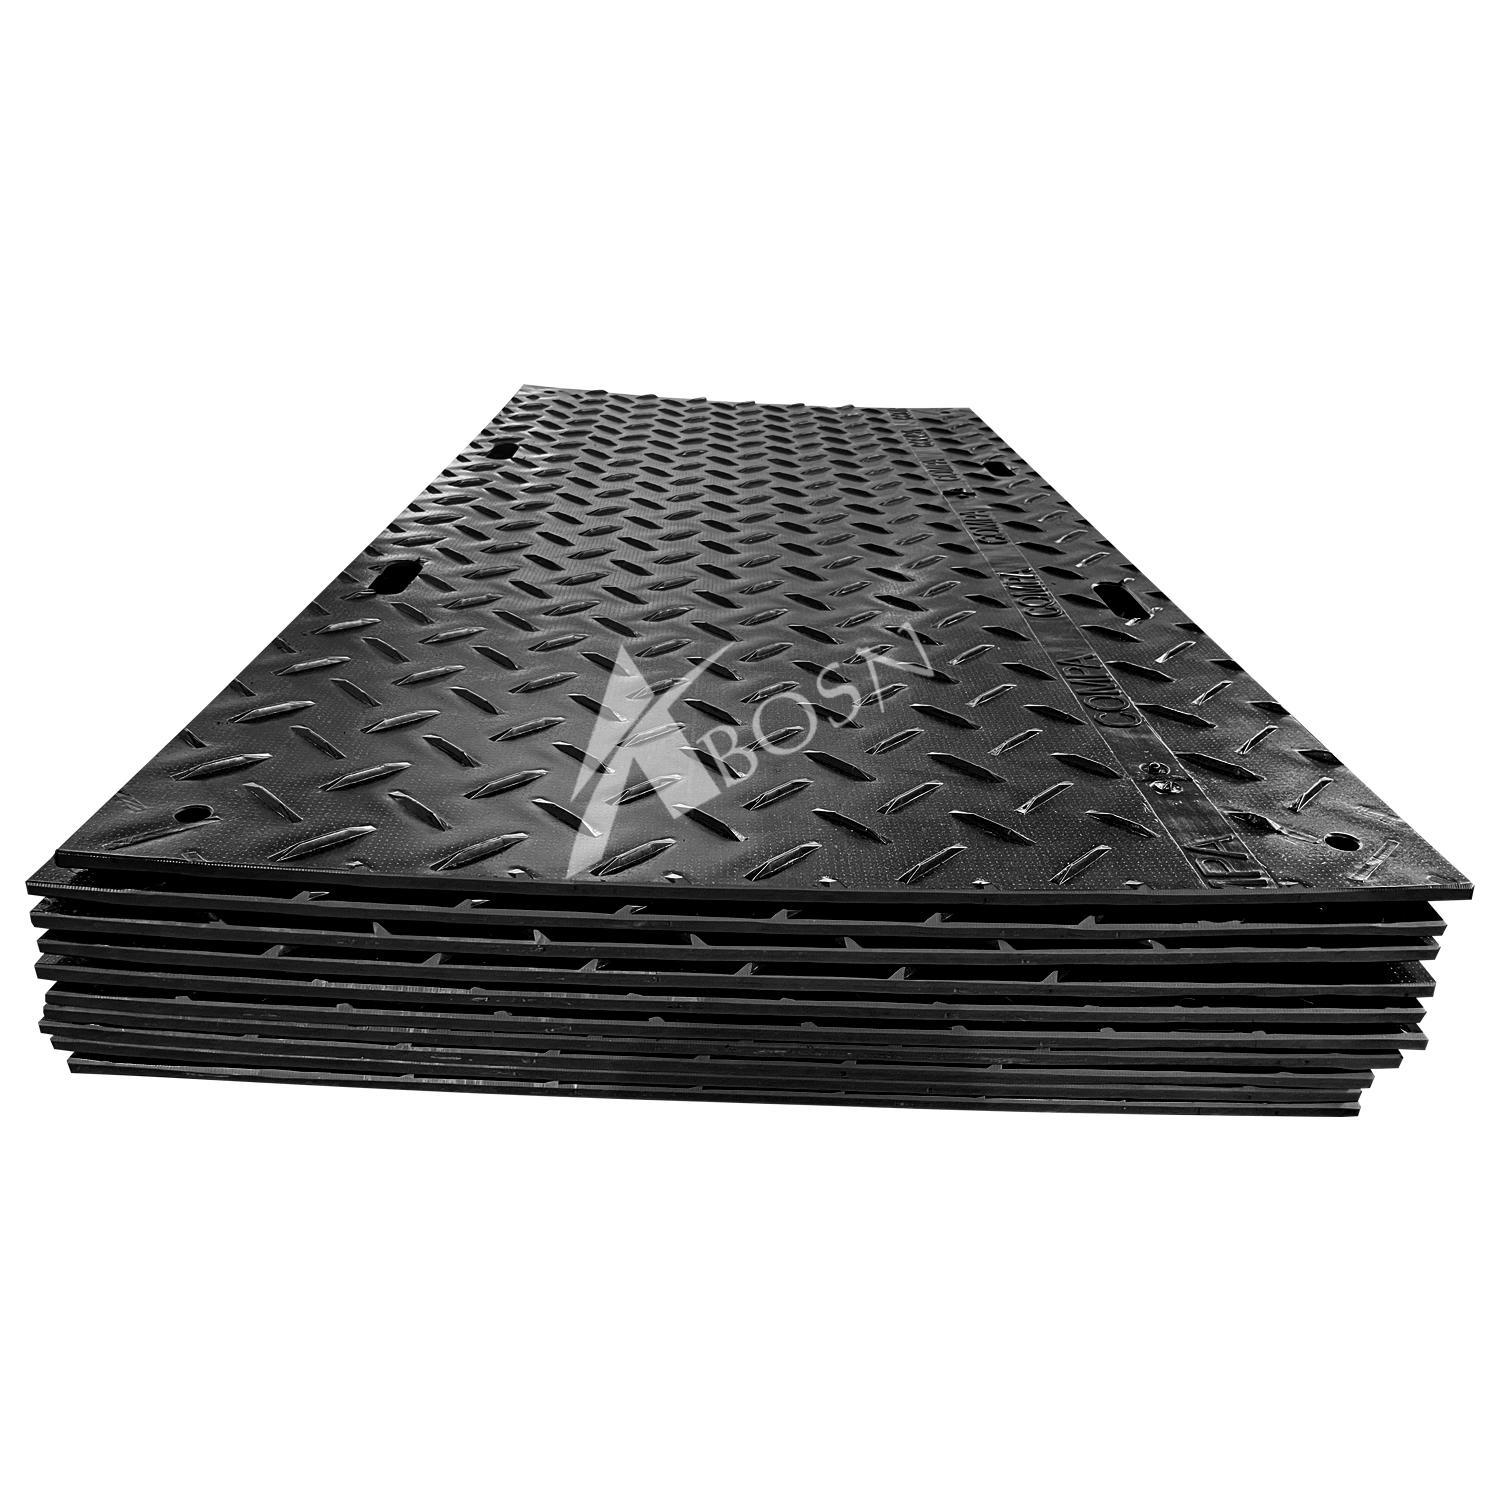 China good quality for architecture ISO Certificated Plastic HDPE 100 tons load capacity temporary road ground access matsChina good quality for architecture ISO Certificated Plastic HDPE 100 tons load capacity temporary road ground access mats